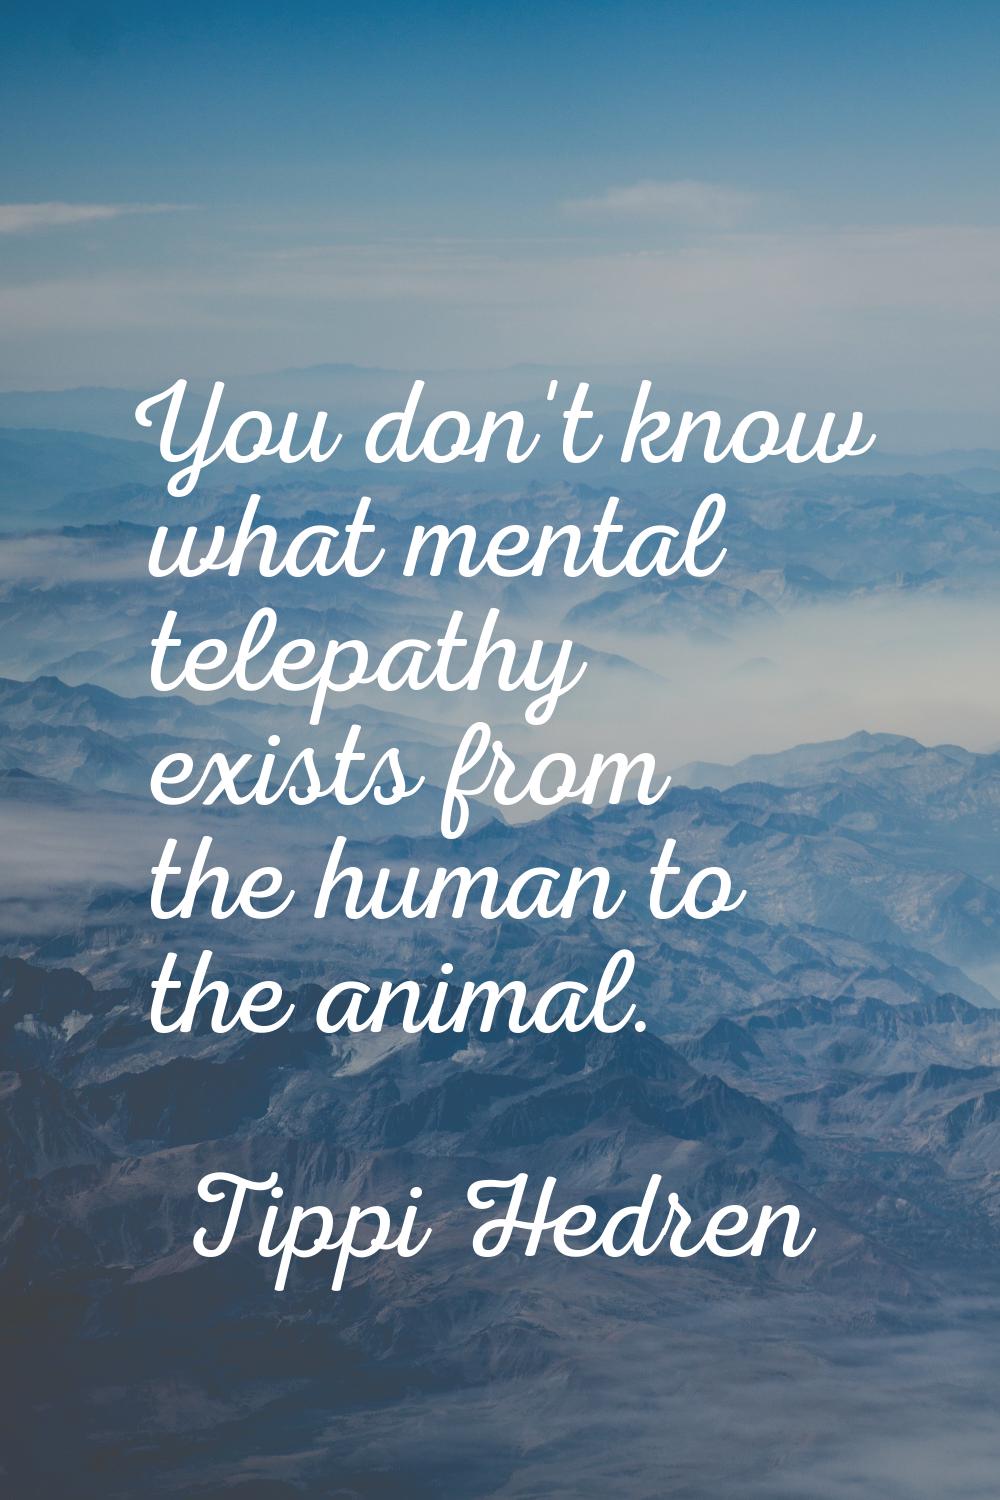 You don't know what mental telepathy exists from the human to the animal.